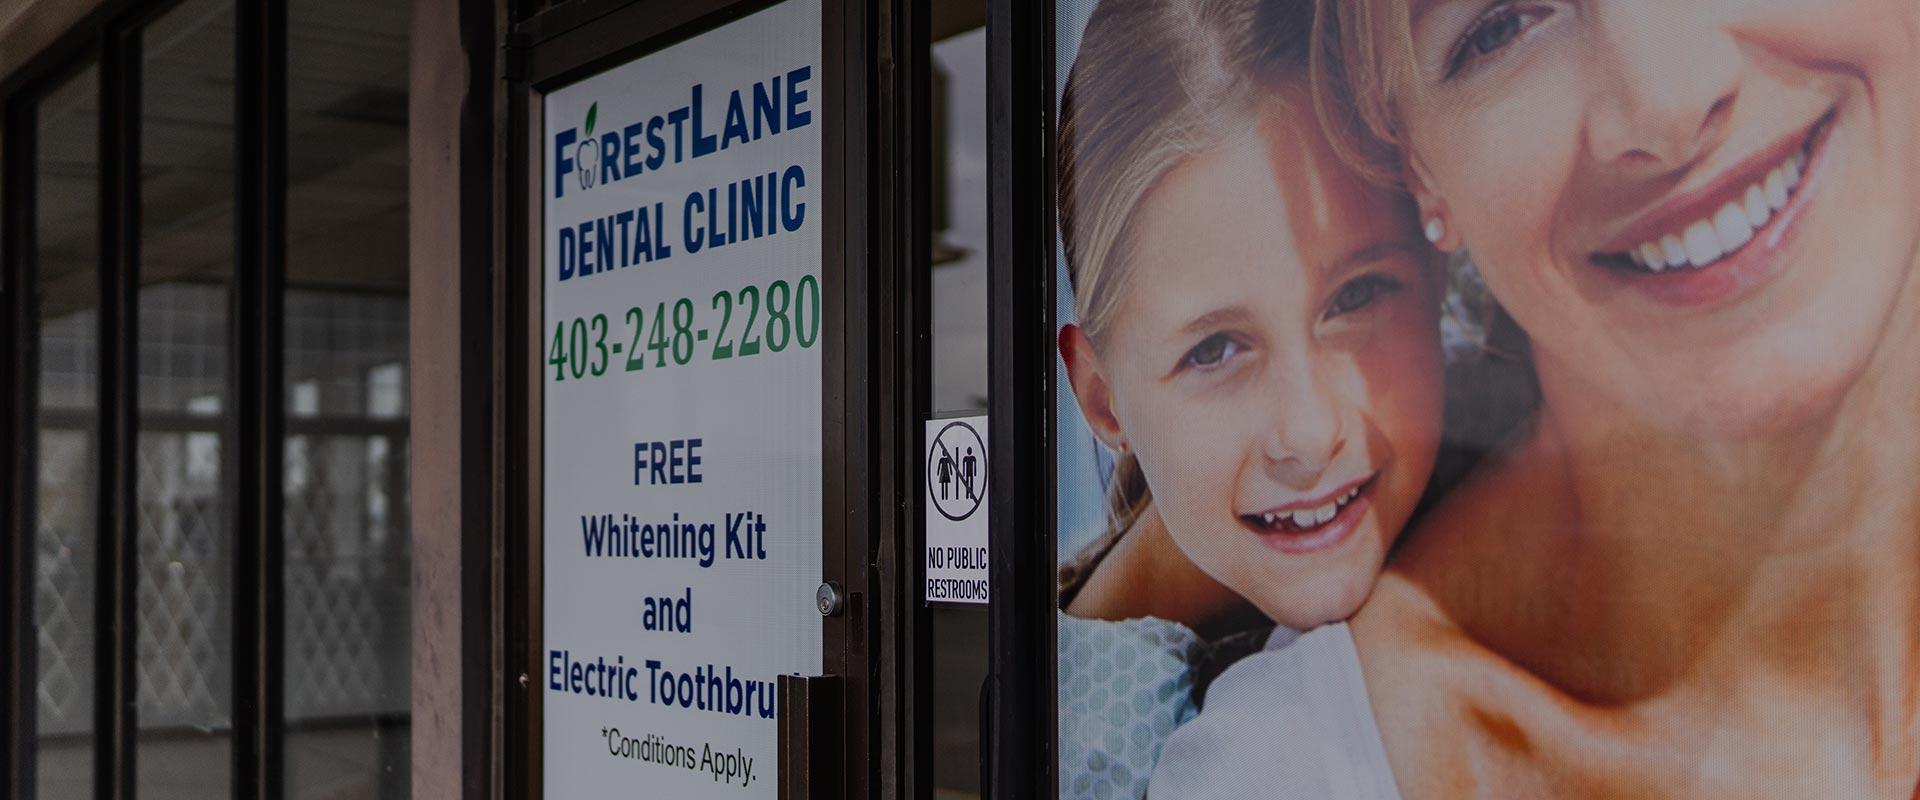 We Welcome All New Patient | Forest Lane Dental Clinic | Family & General Dentists | SE Calgary